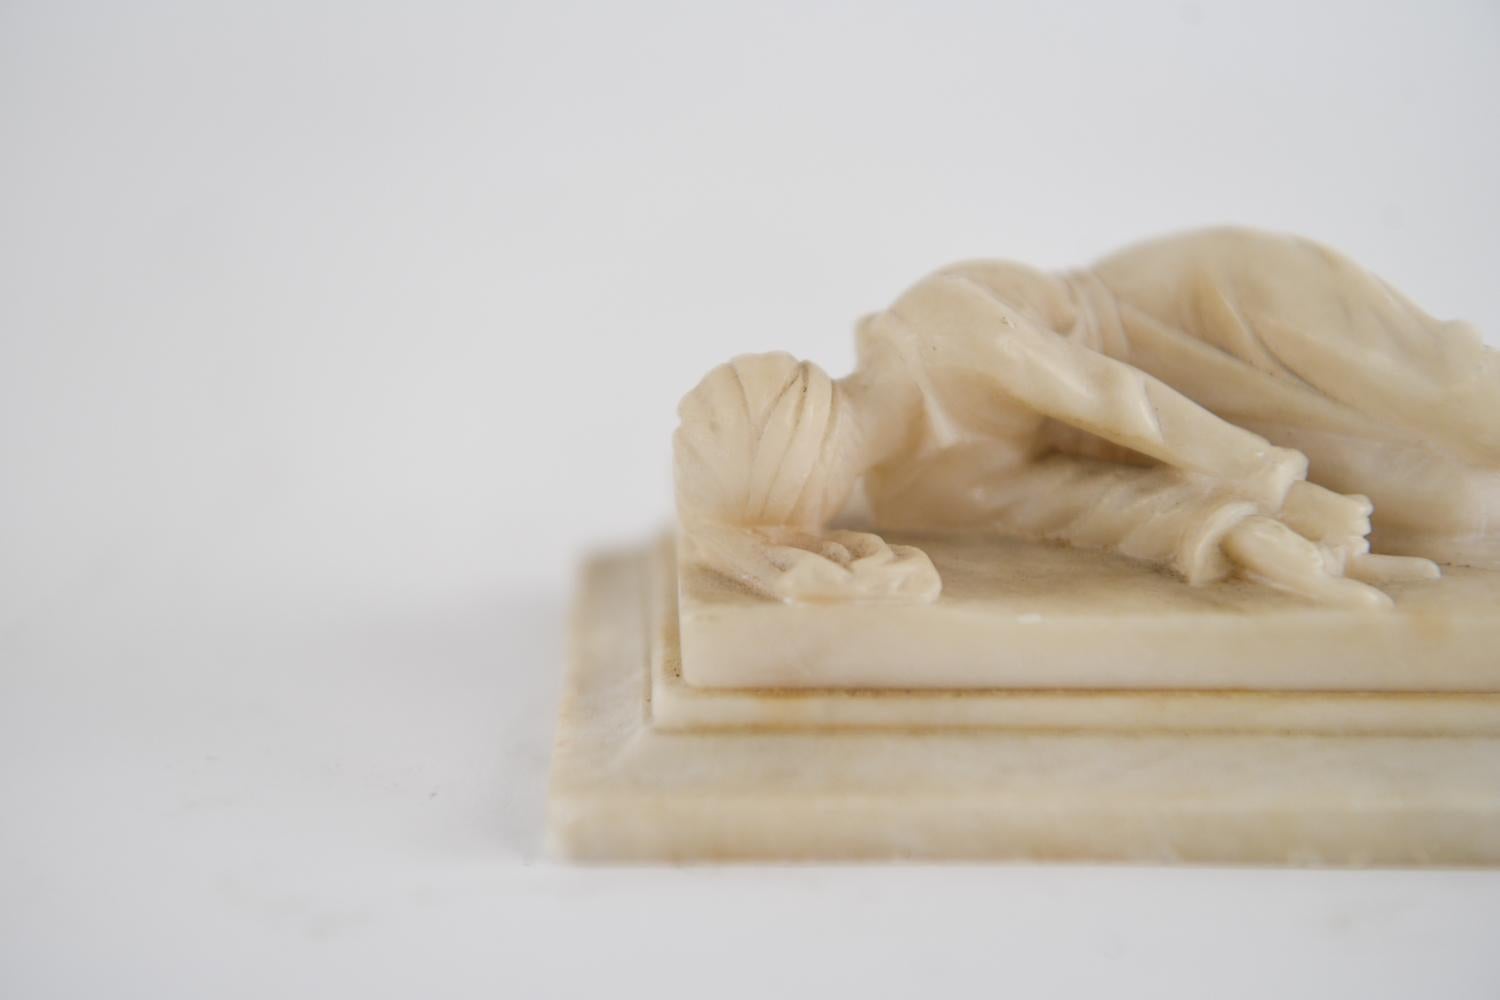 19th Century 19th C. Alabaster Paperweight After Maderno, 